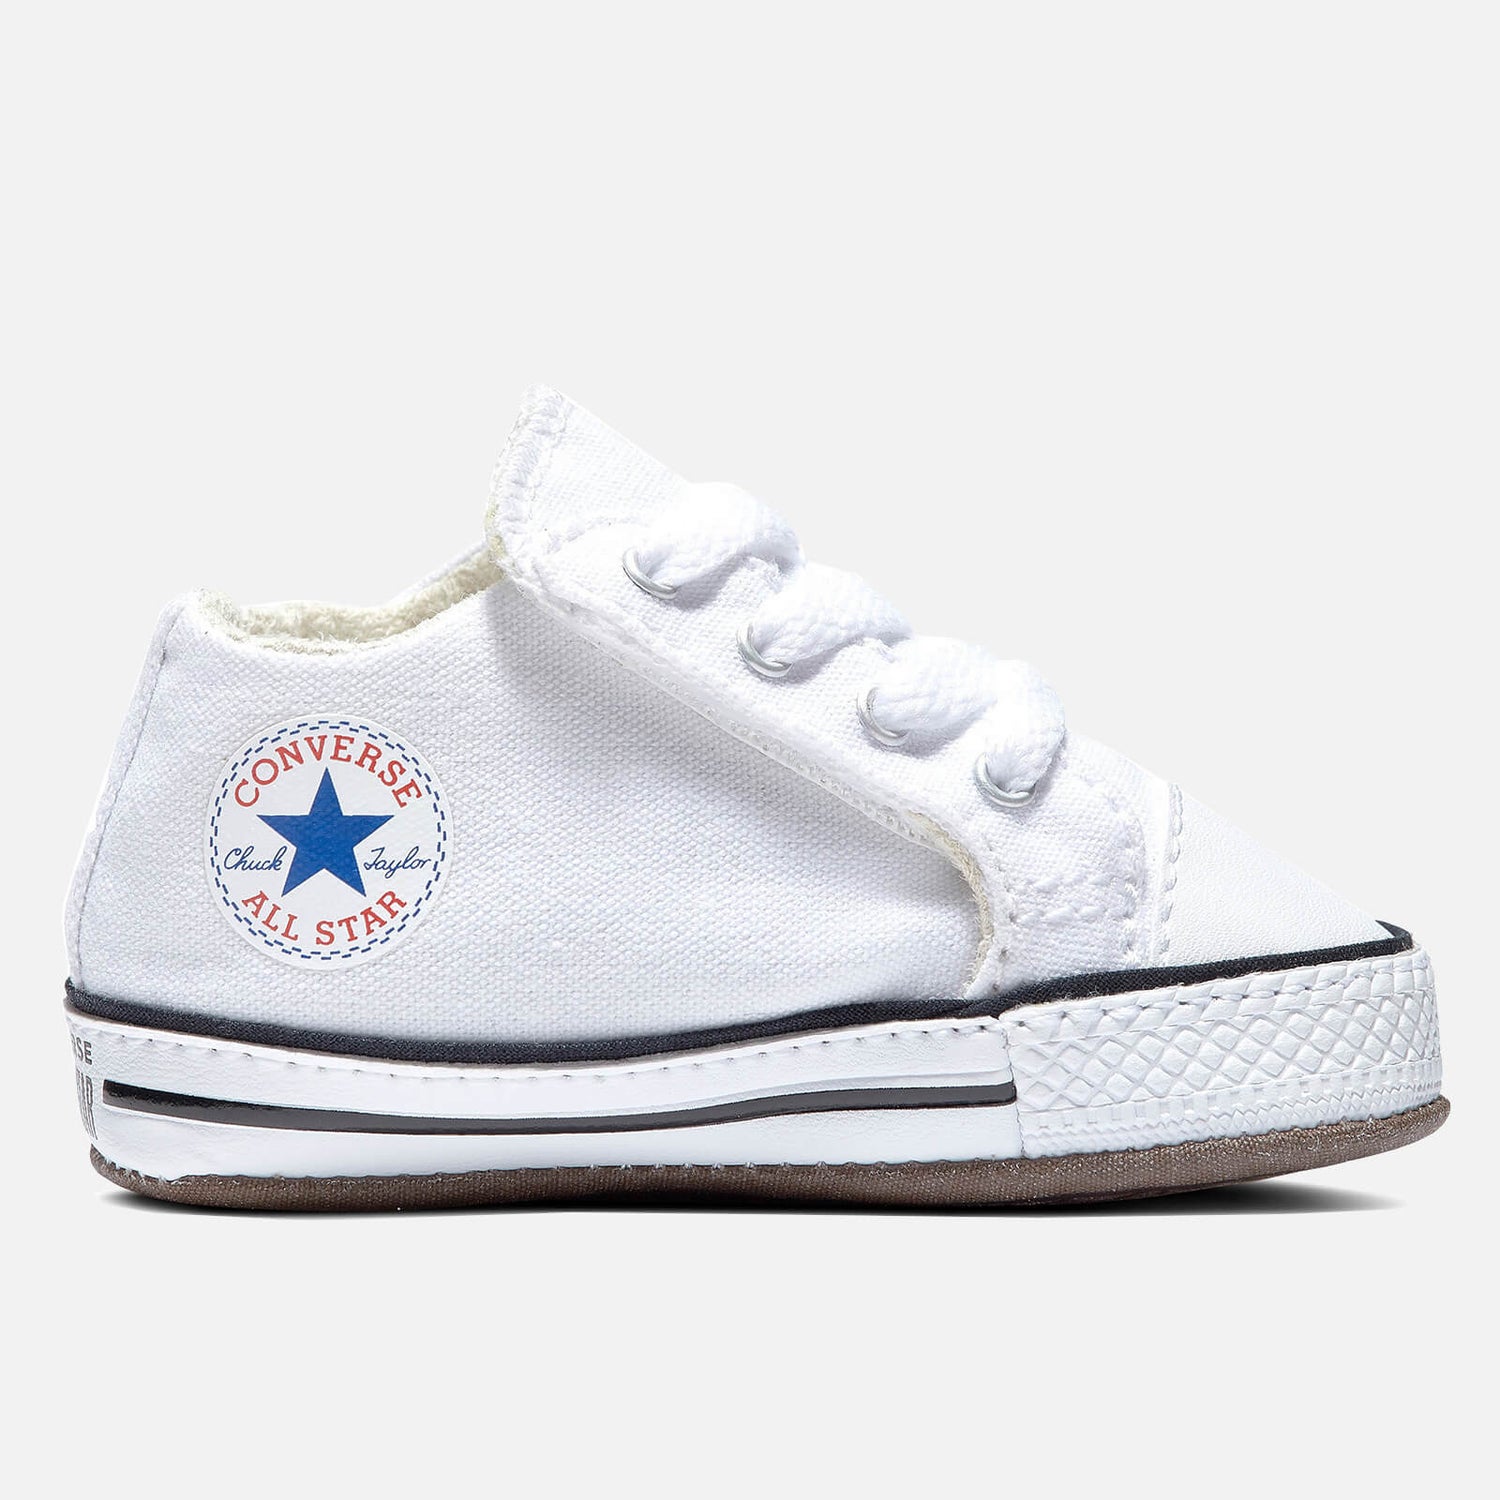 Converse Babys' Chuck Taylor All Star Cribster Soft Trainers - White